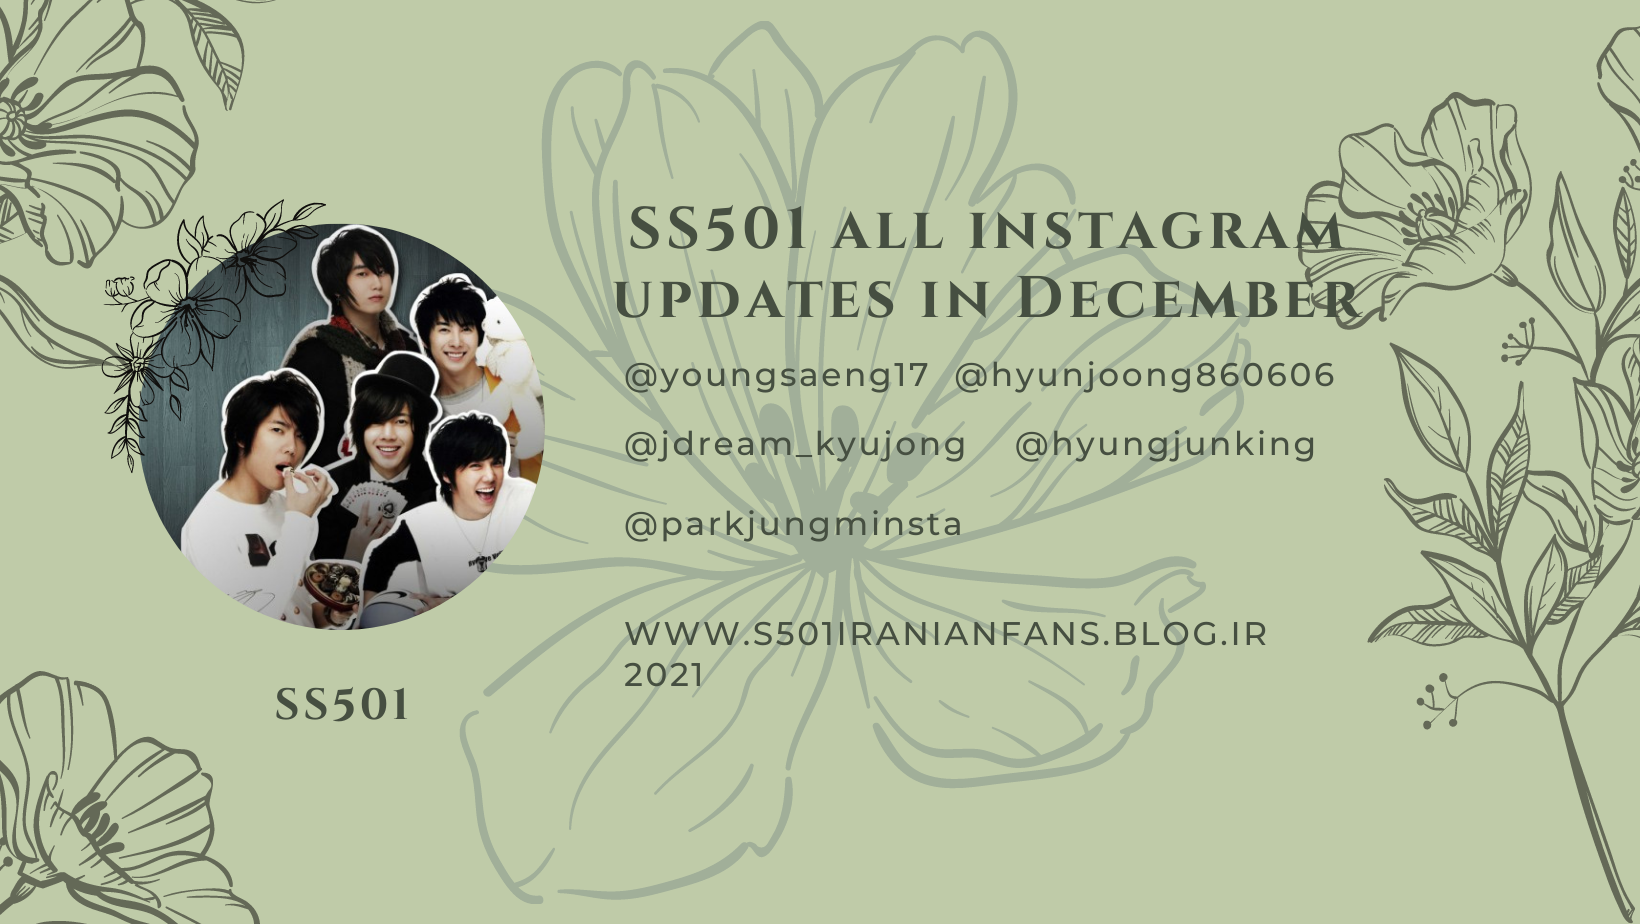 Ss501, ss501 wallpaper, ss501 instagram, ss501 picture